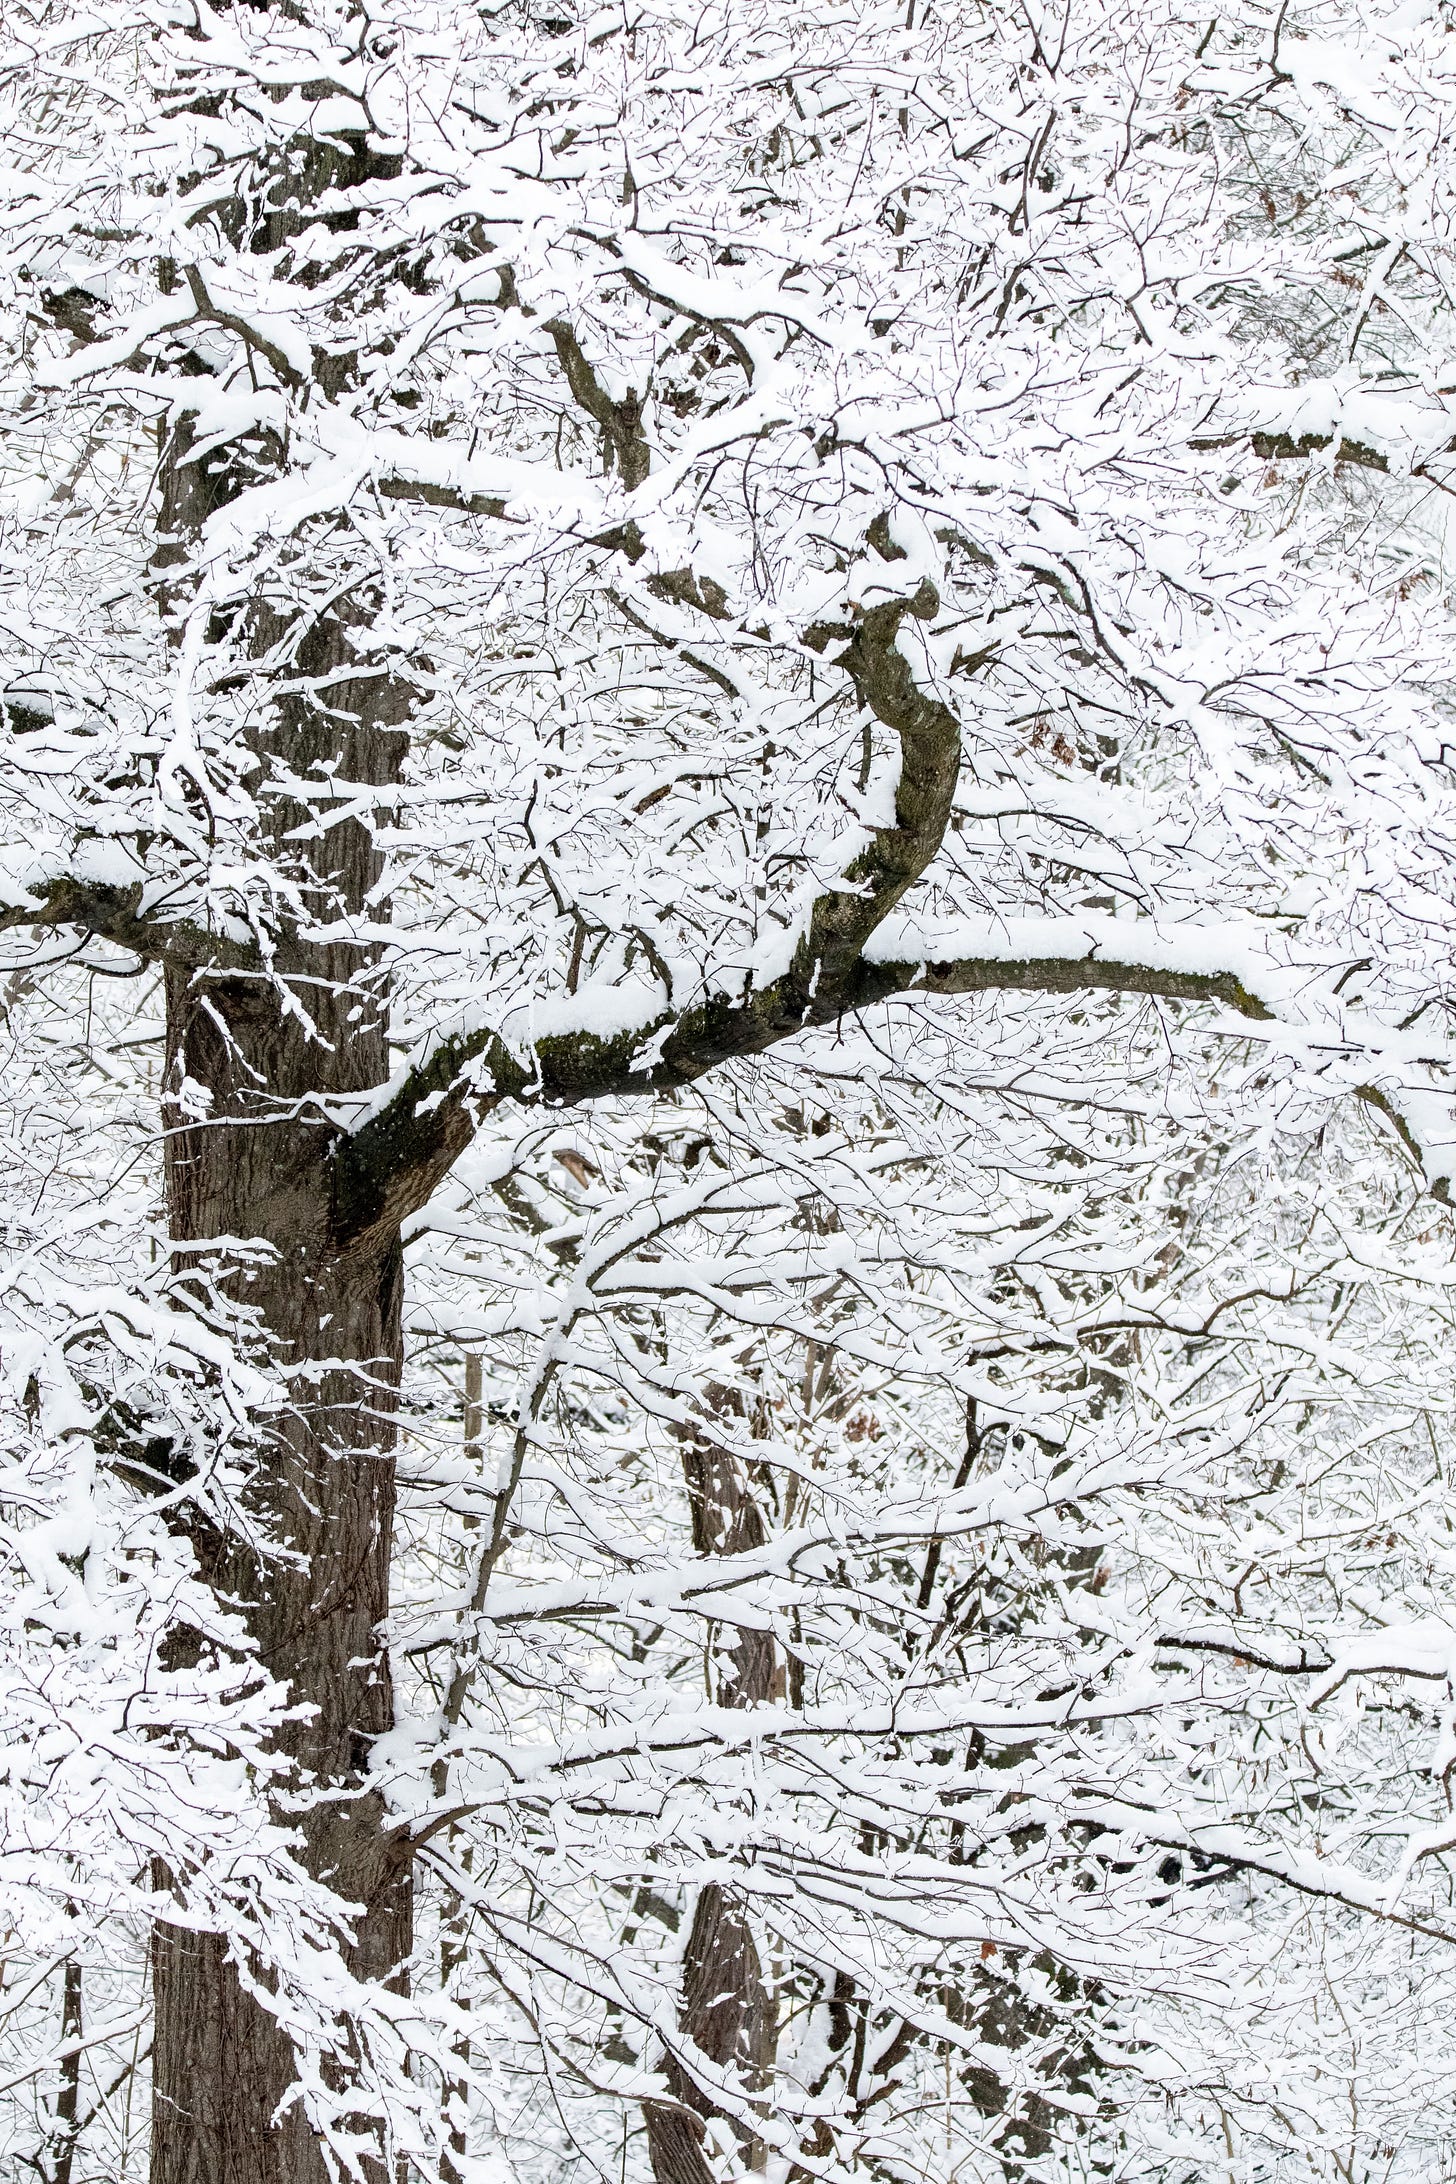 Thick layers of snow resting on a network of bare tree branches